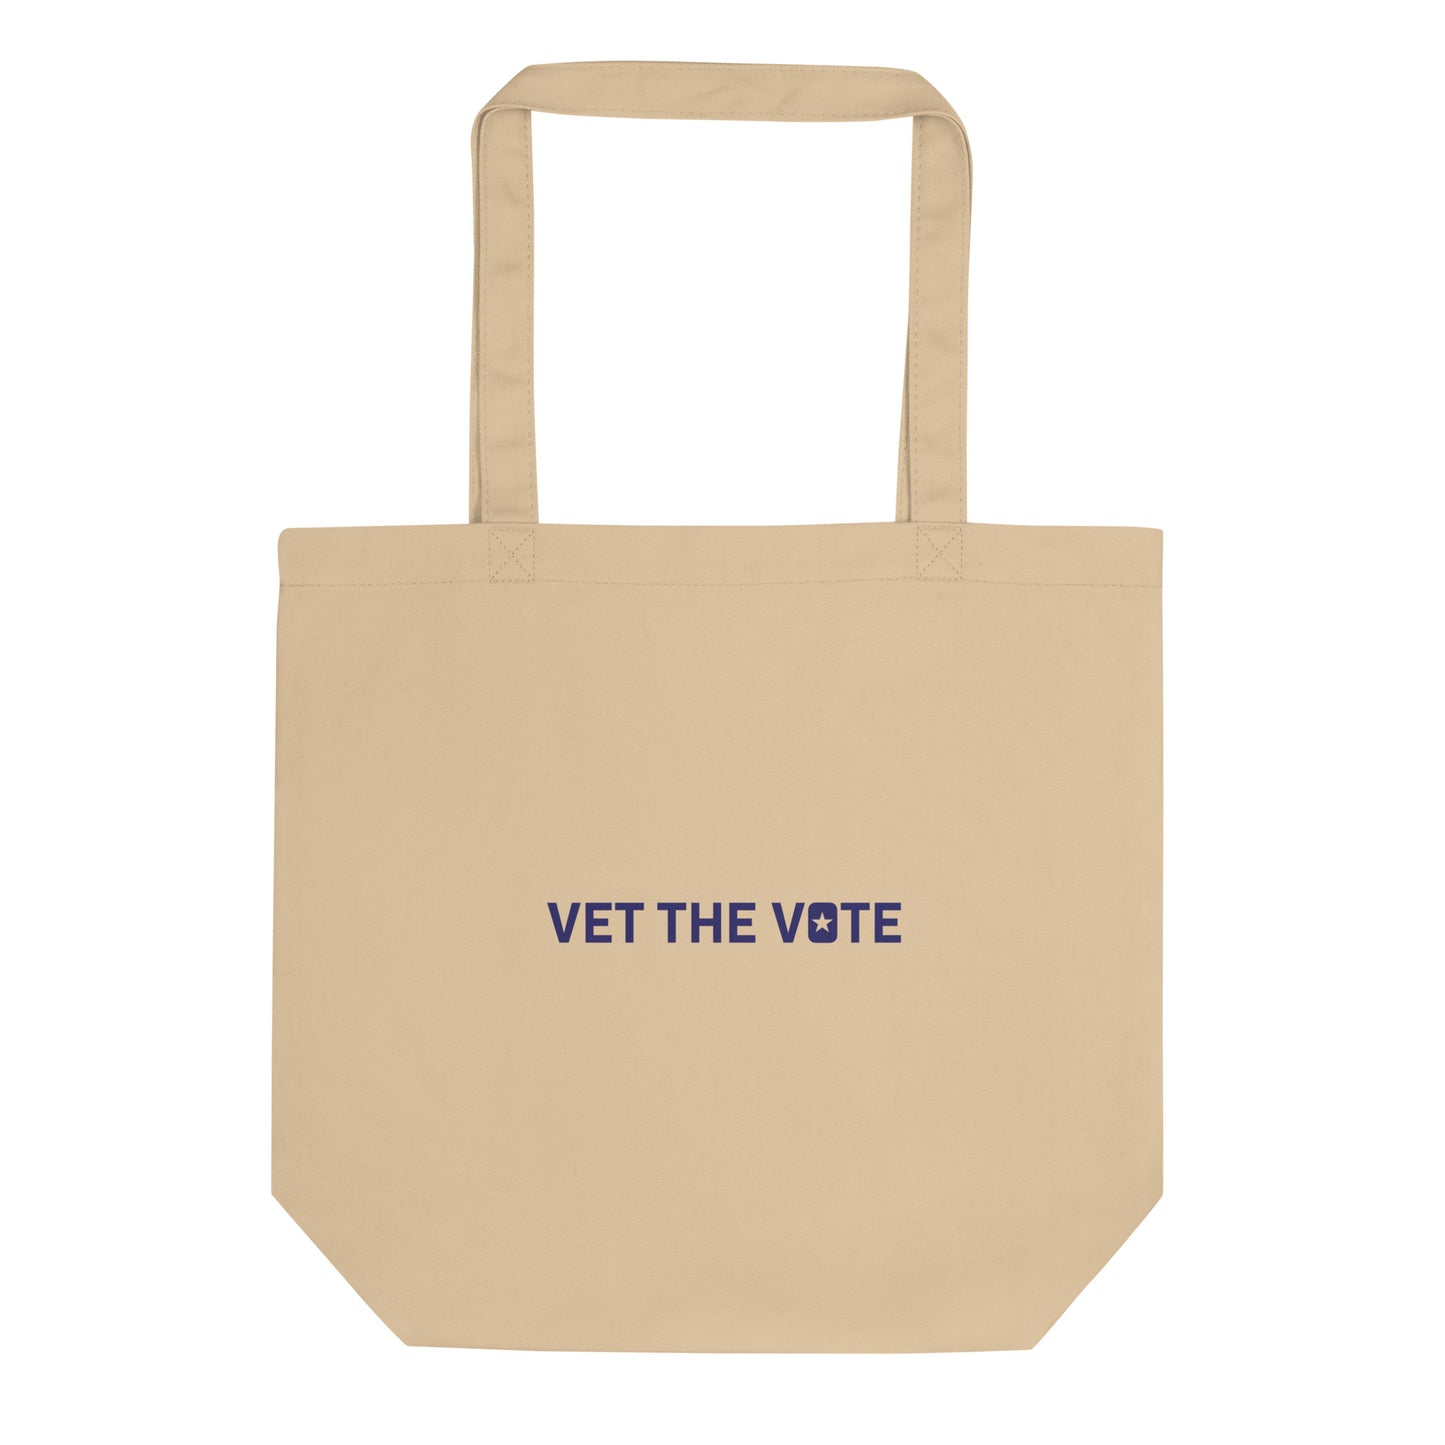 Tote Bag - 2 sided